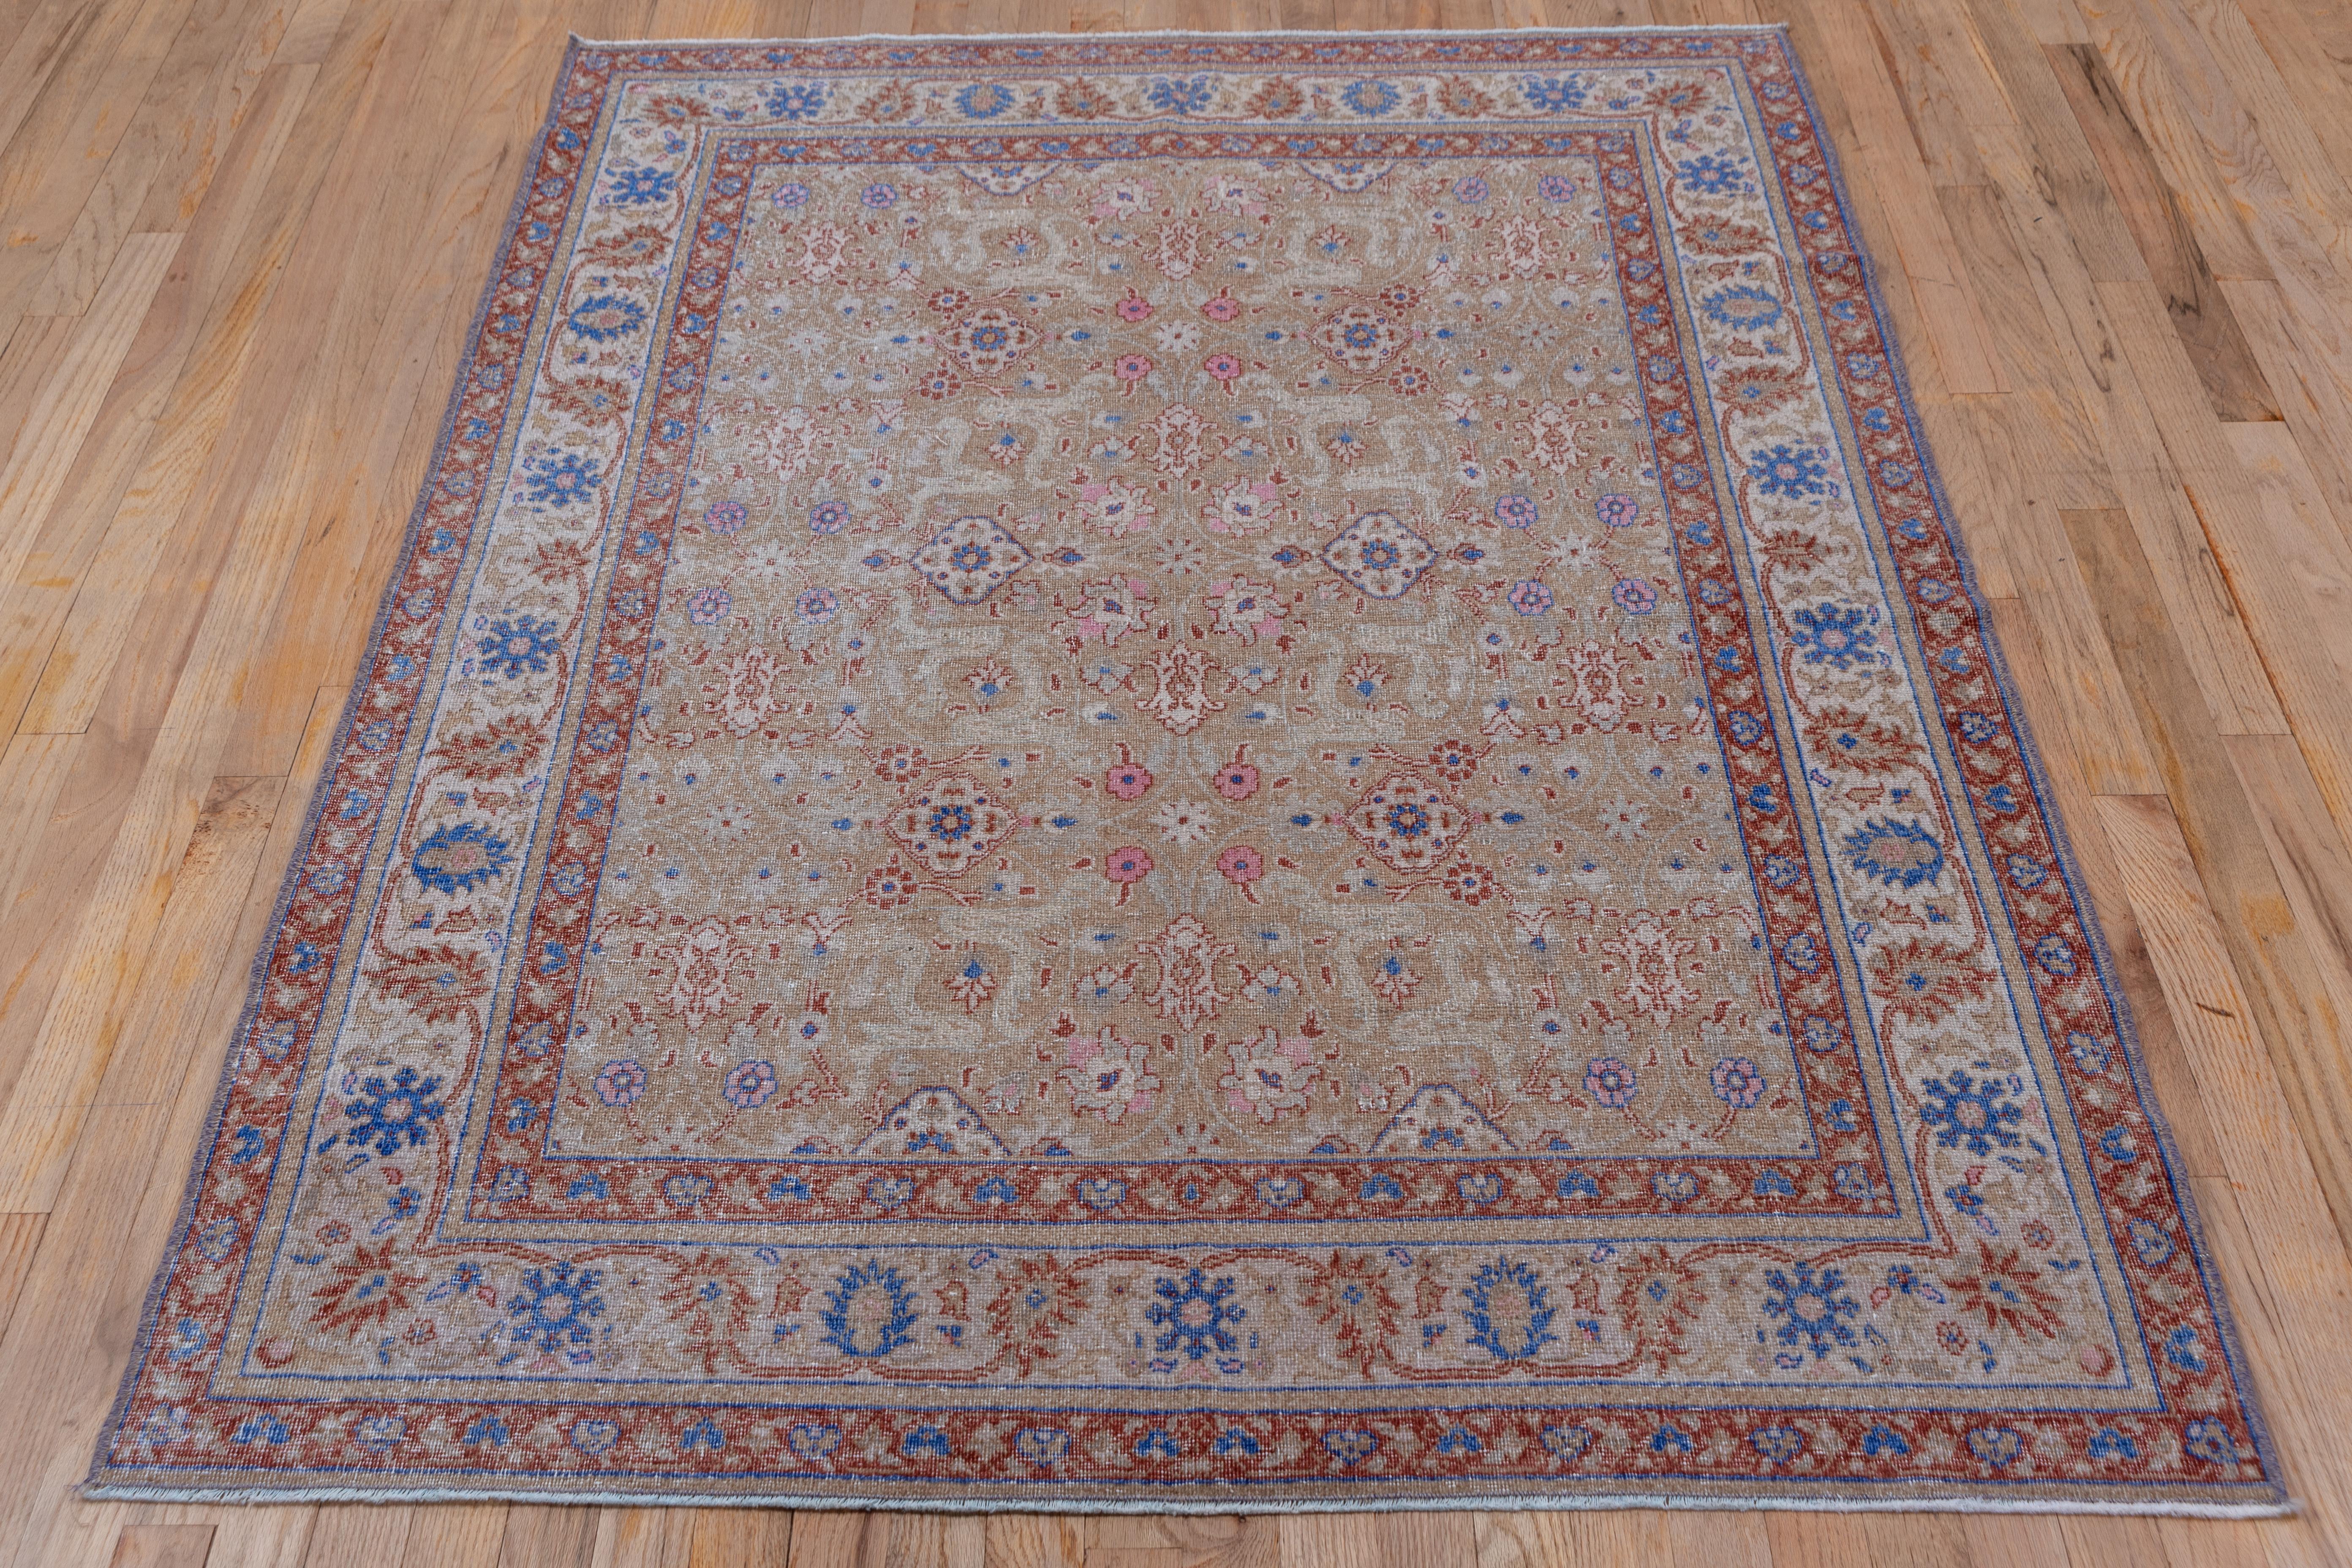 This somewhat distressed eastern Turkish town scatter has a buff field supporting an all-over pattern of ivory medallions, leafy cartouches, petal palmettes and small rosettes, detailed in ivory, brown, cerulean, and light teal. The ivory border